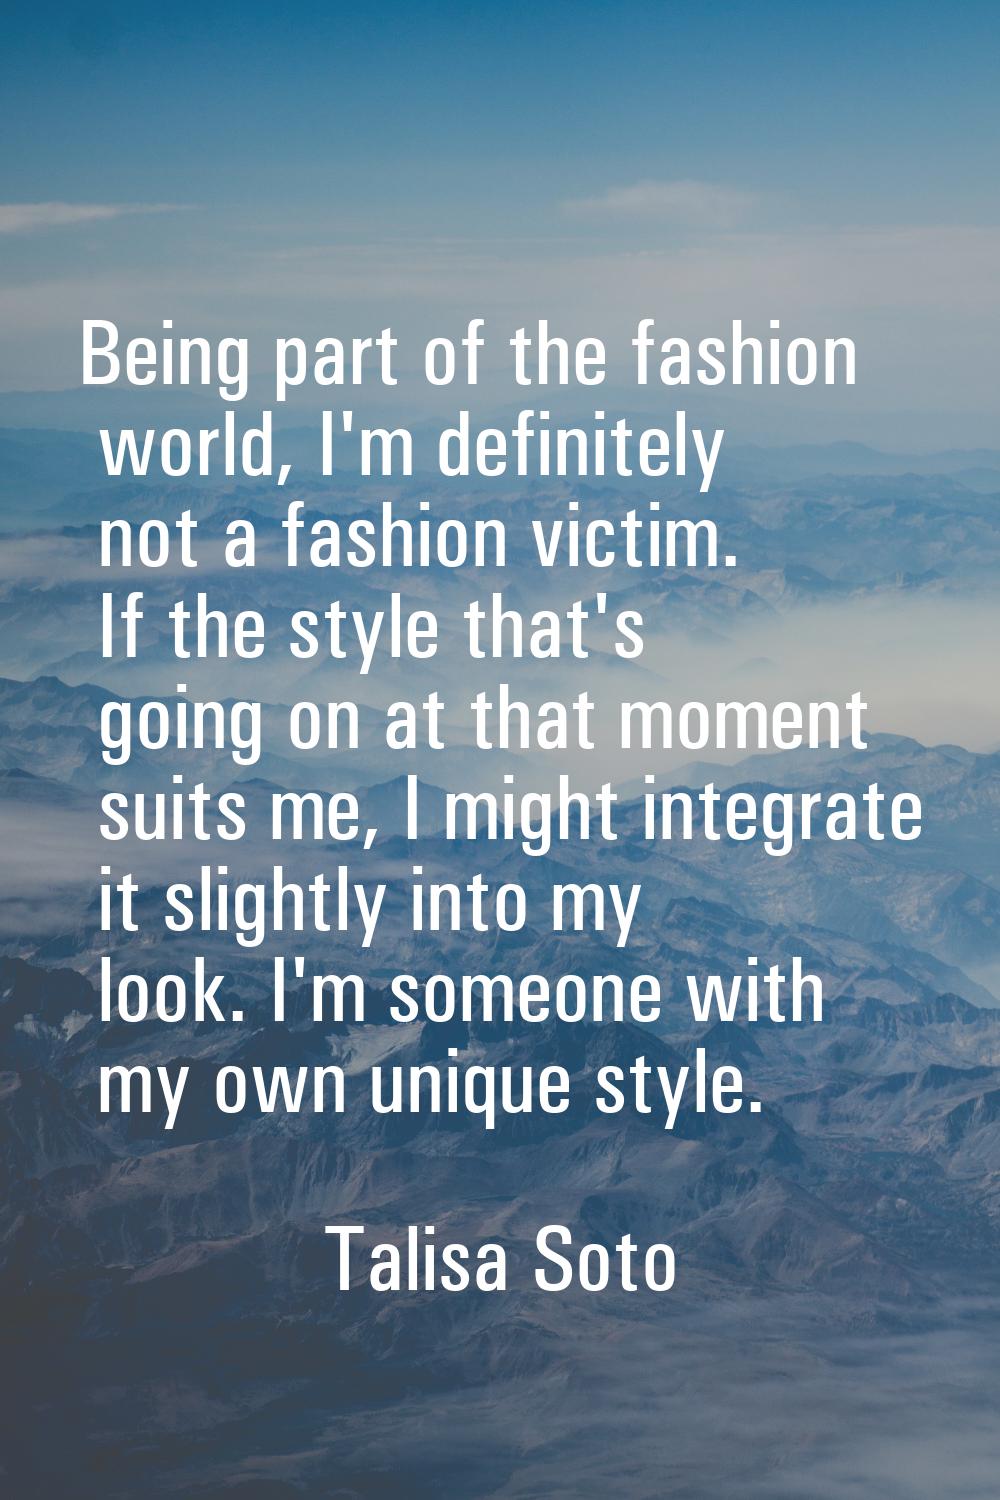 Being part of the fashion world, I'm definitely not a fashion victim. If the style that's going on 